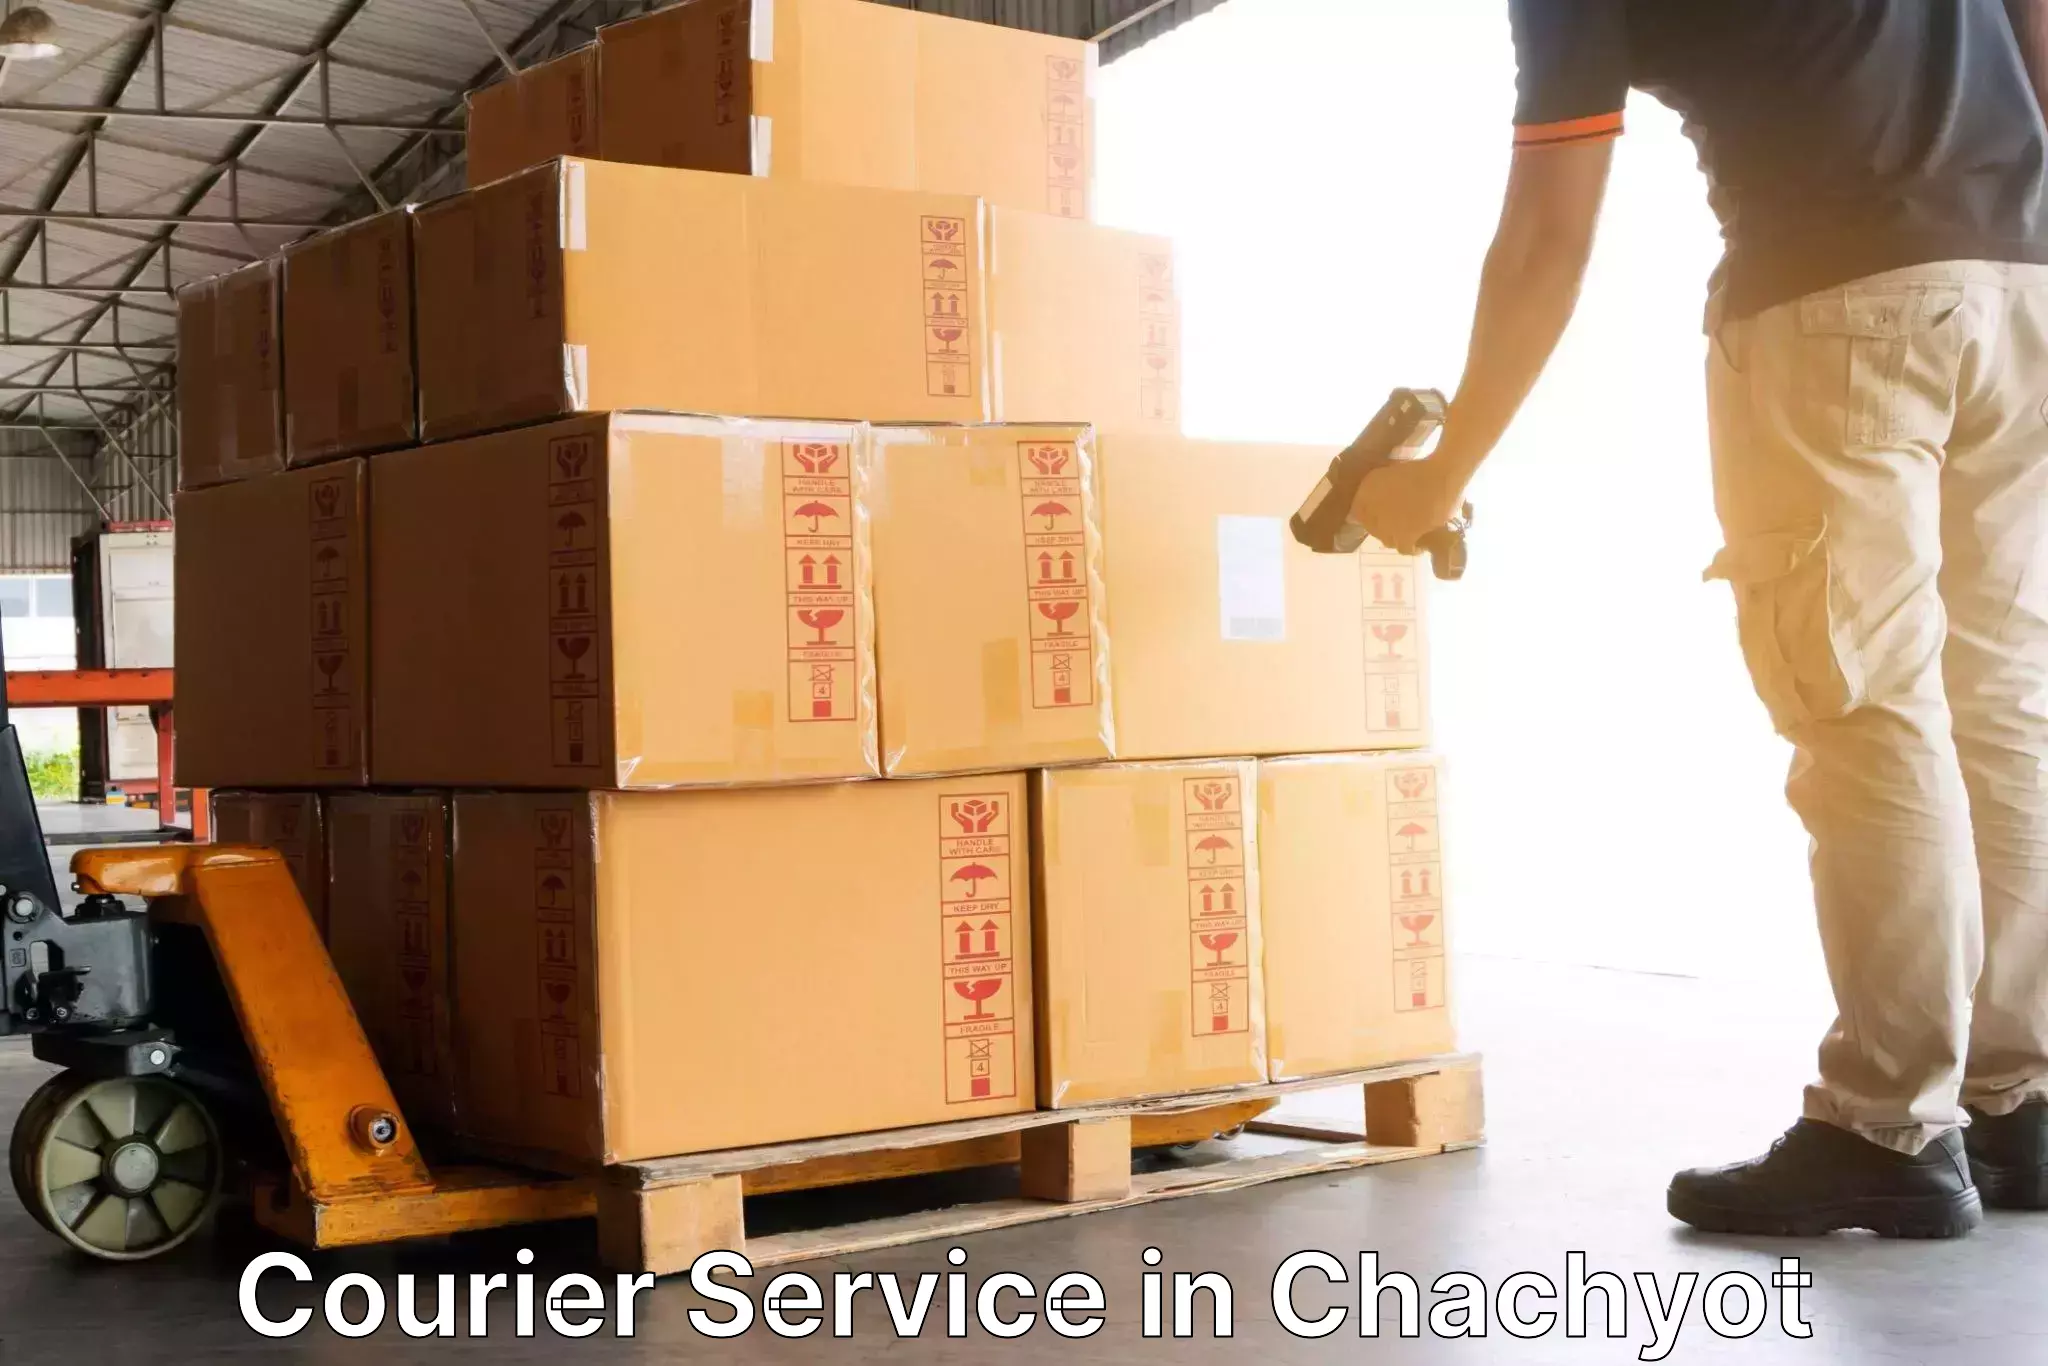 24-hour courier service in Chachyot